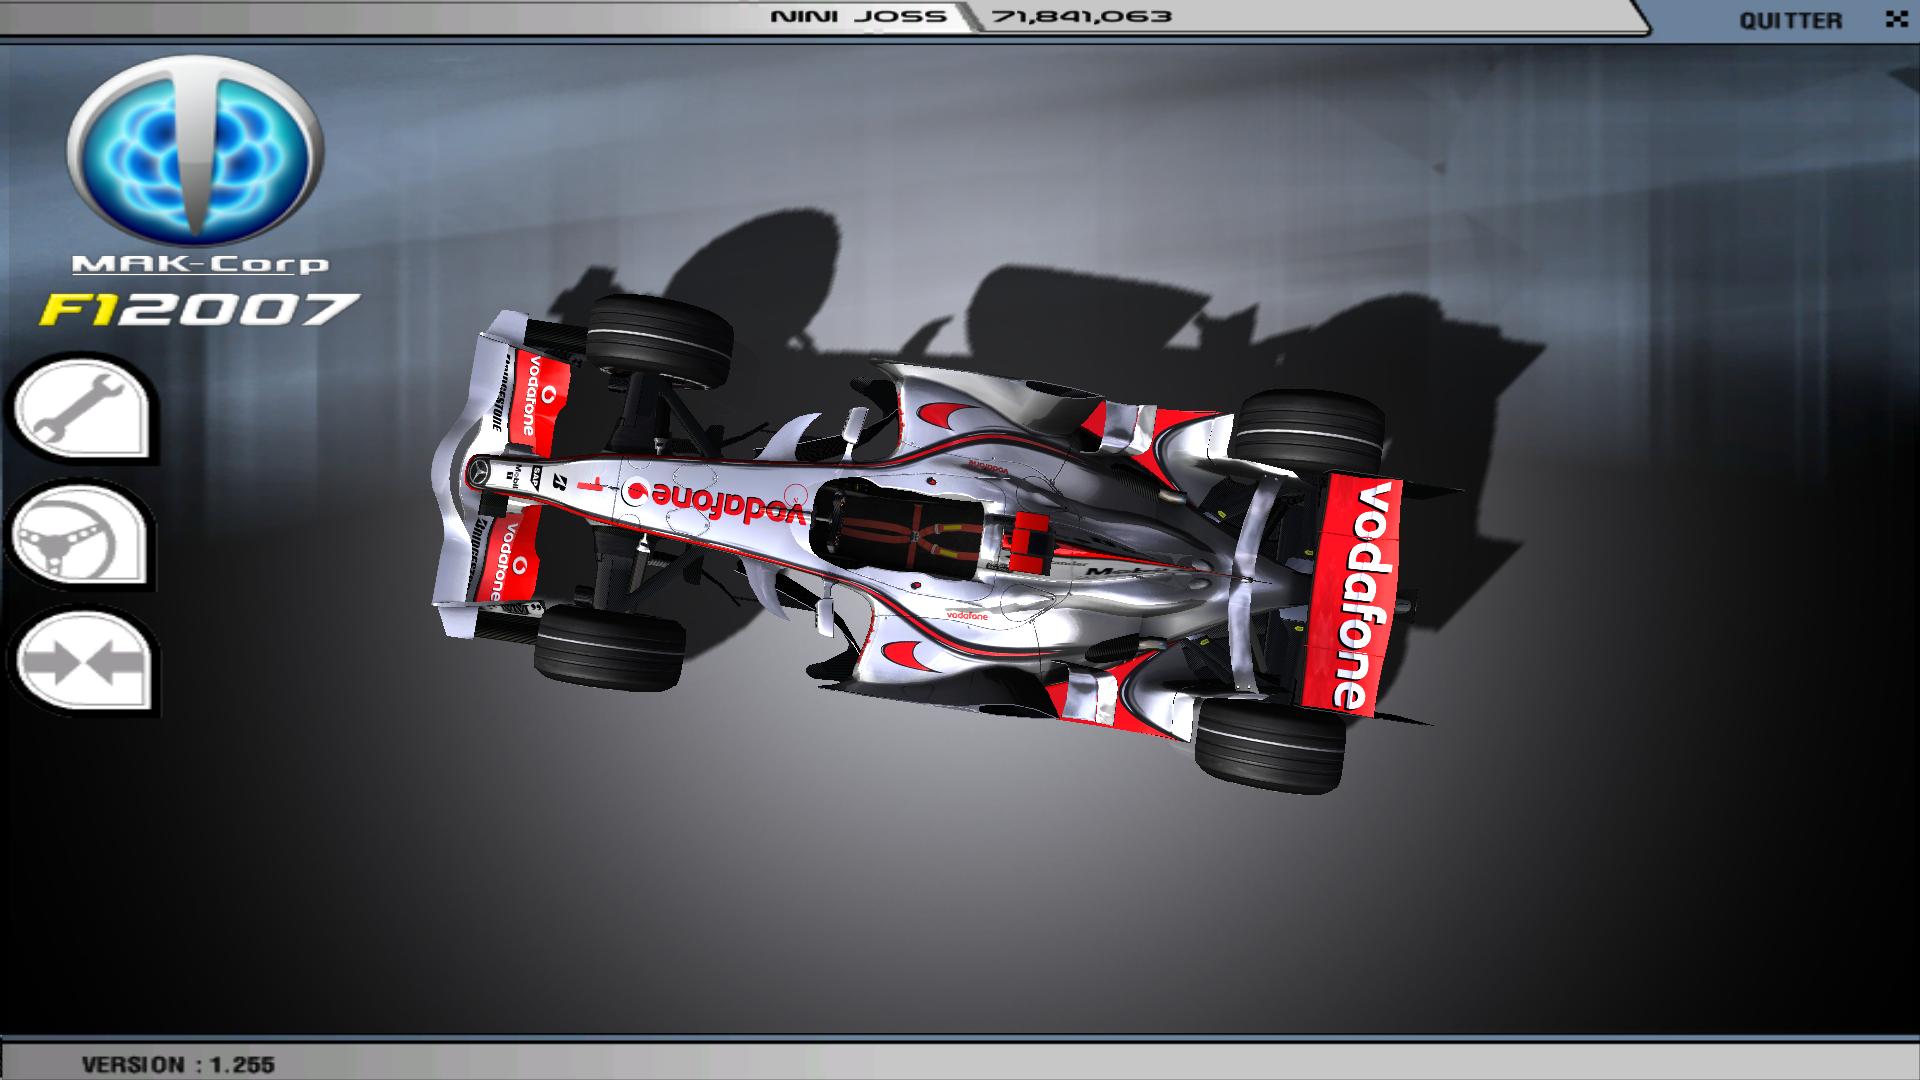 Who is the founder of vodafone mclaren mercedes team #4